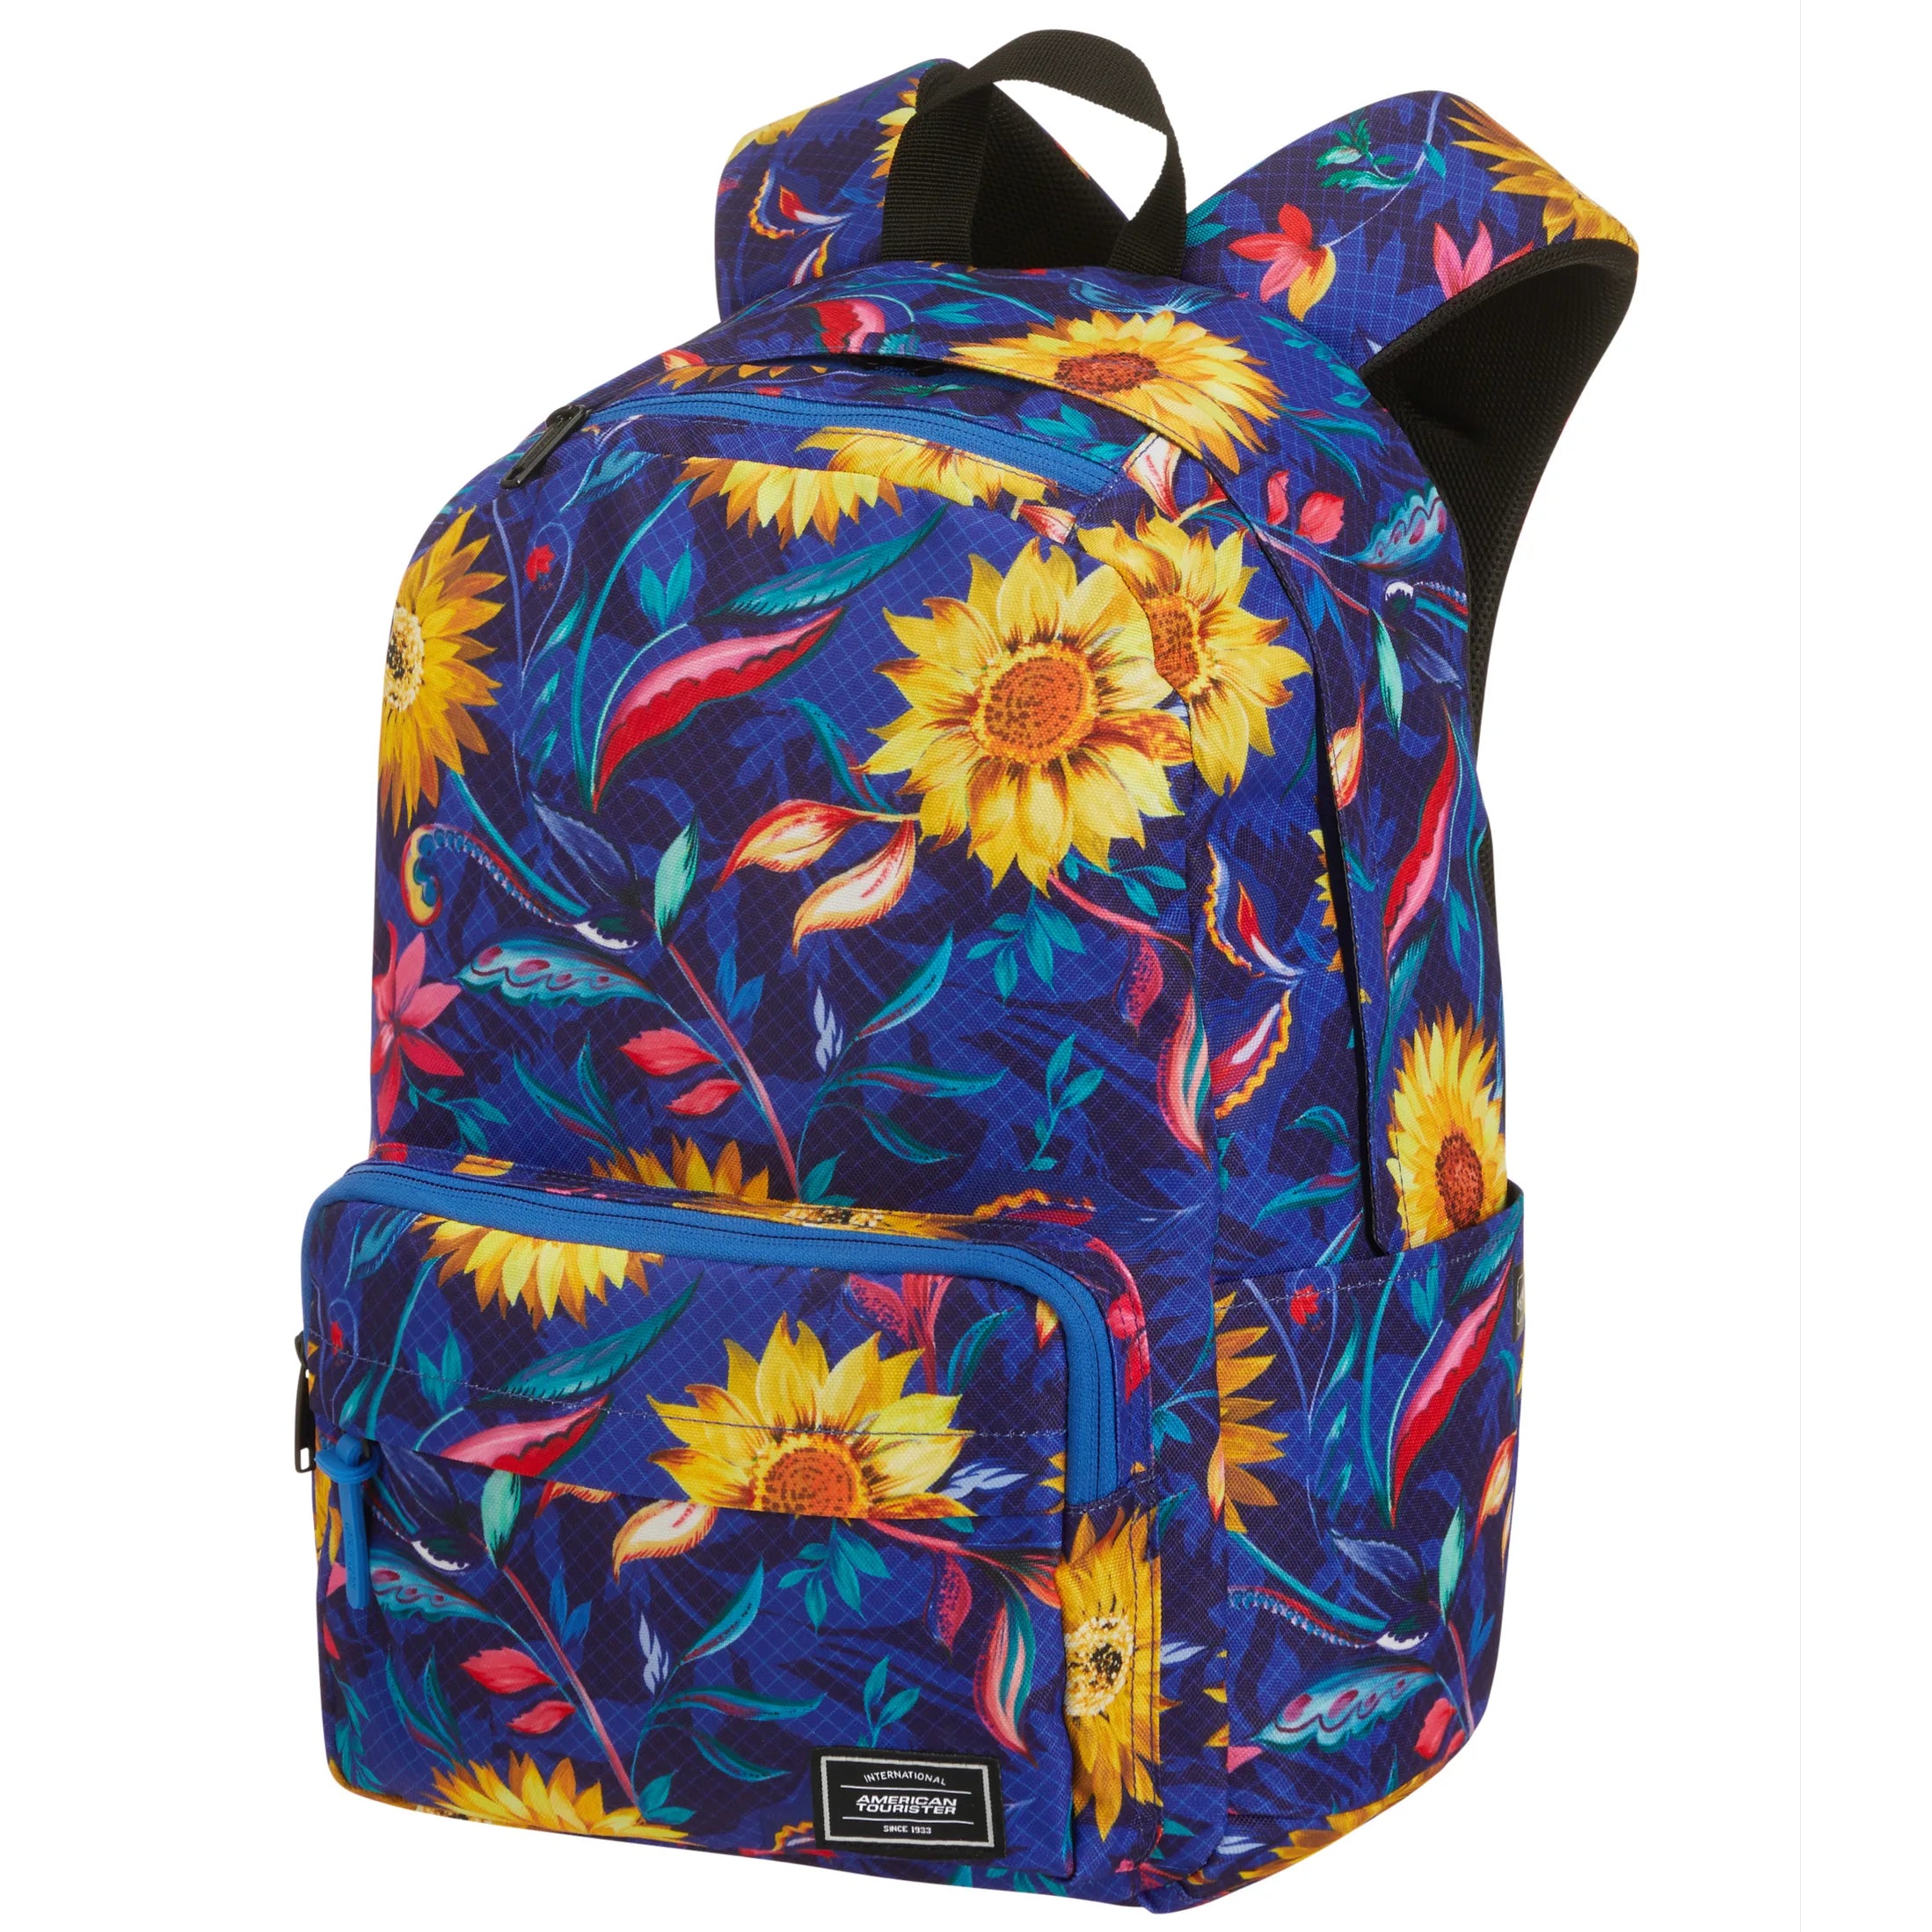 American Tourister Urban Groove Lifestyle Backpack 1 40 cm - sunflower